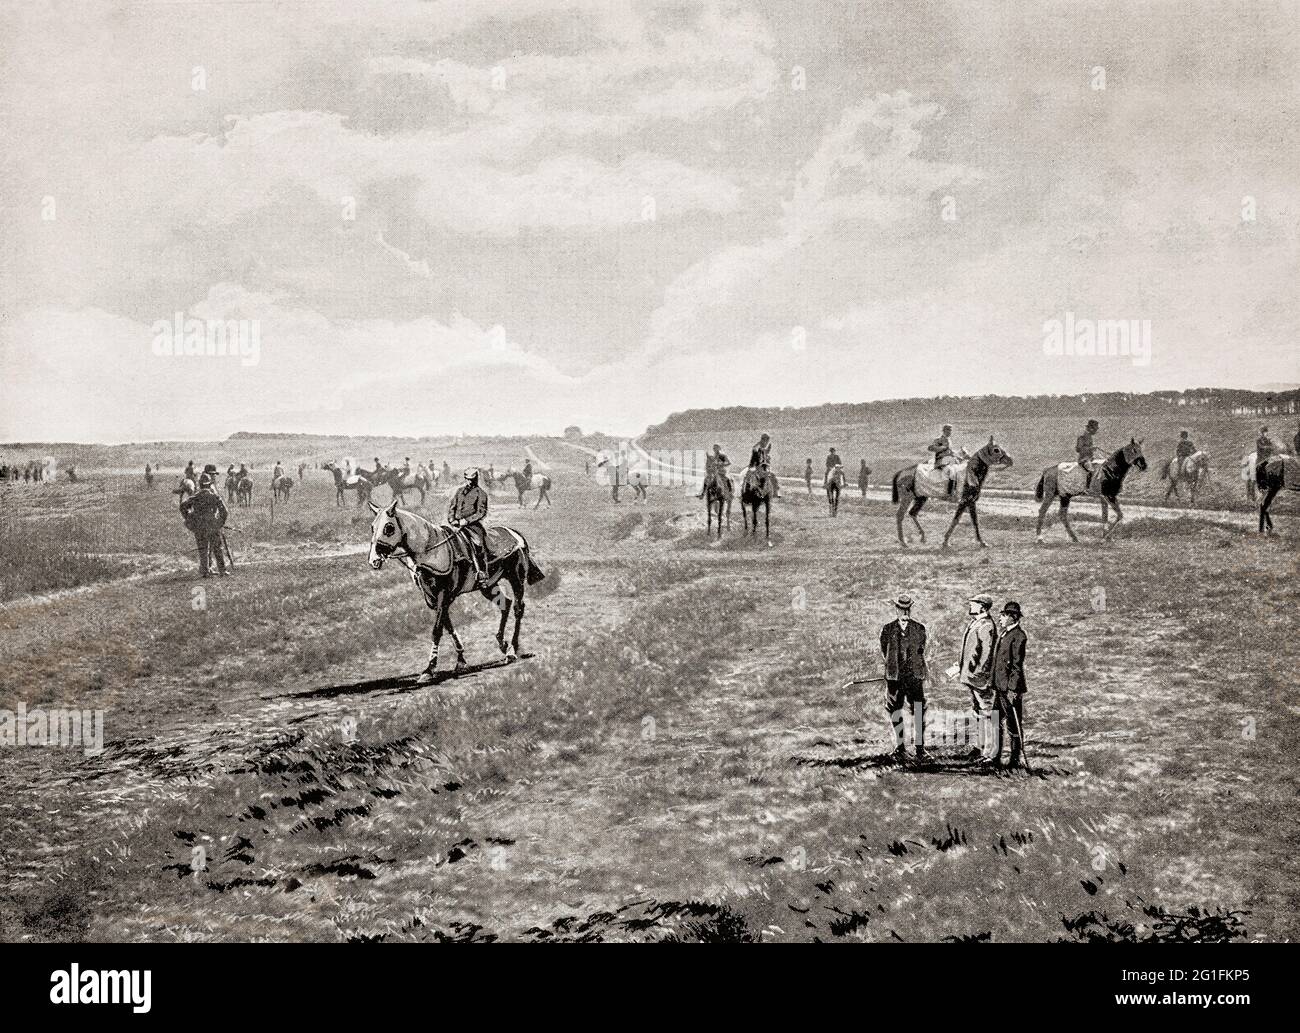 A late 19th century view of thoroughbred horses training on Bury Heath near Newmarket, a market town in Suffolk, England.  It is generally considered the global centre and birthplace of thoroughbred horse racing, dating as far back as 1174, making it the earliest known racing venue of post-classical times. King James I (reigned 1603–1625) greatly increased the popularity of horse racing there, and King Charles I followed this by inaugurating the first cup race in 1634. The Jockey Club's clubhouse is in Newmarket, though its administration is based in London. Stock Photo